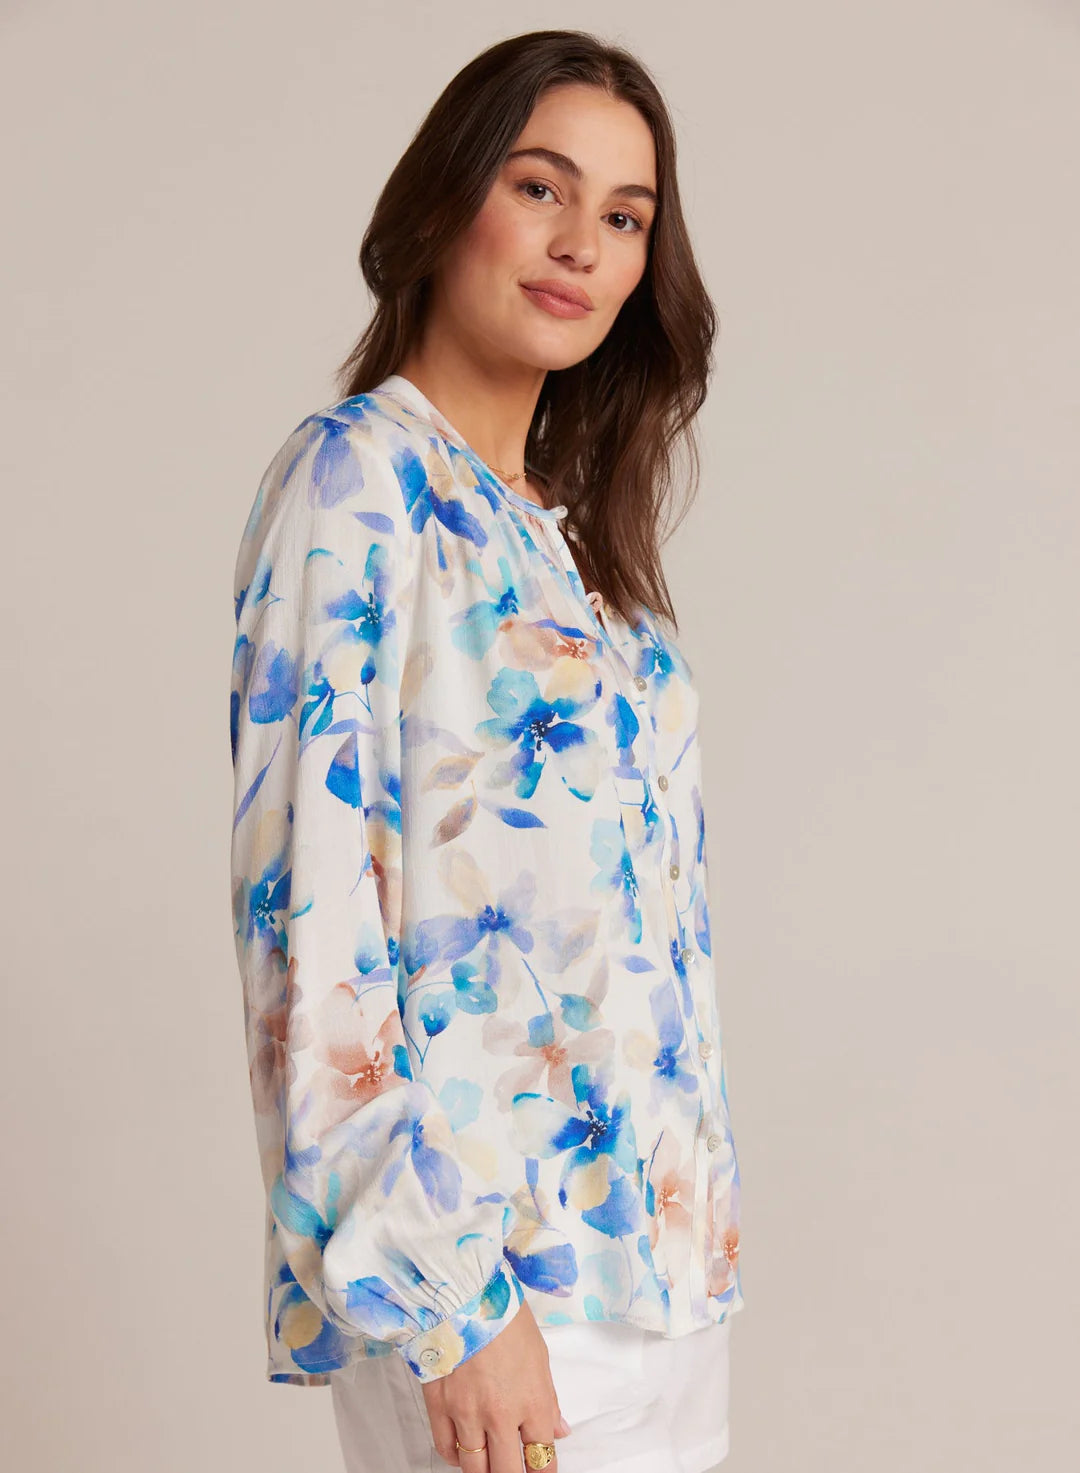 BUTTON LOOP FRONT SHIRT